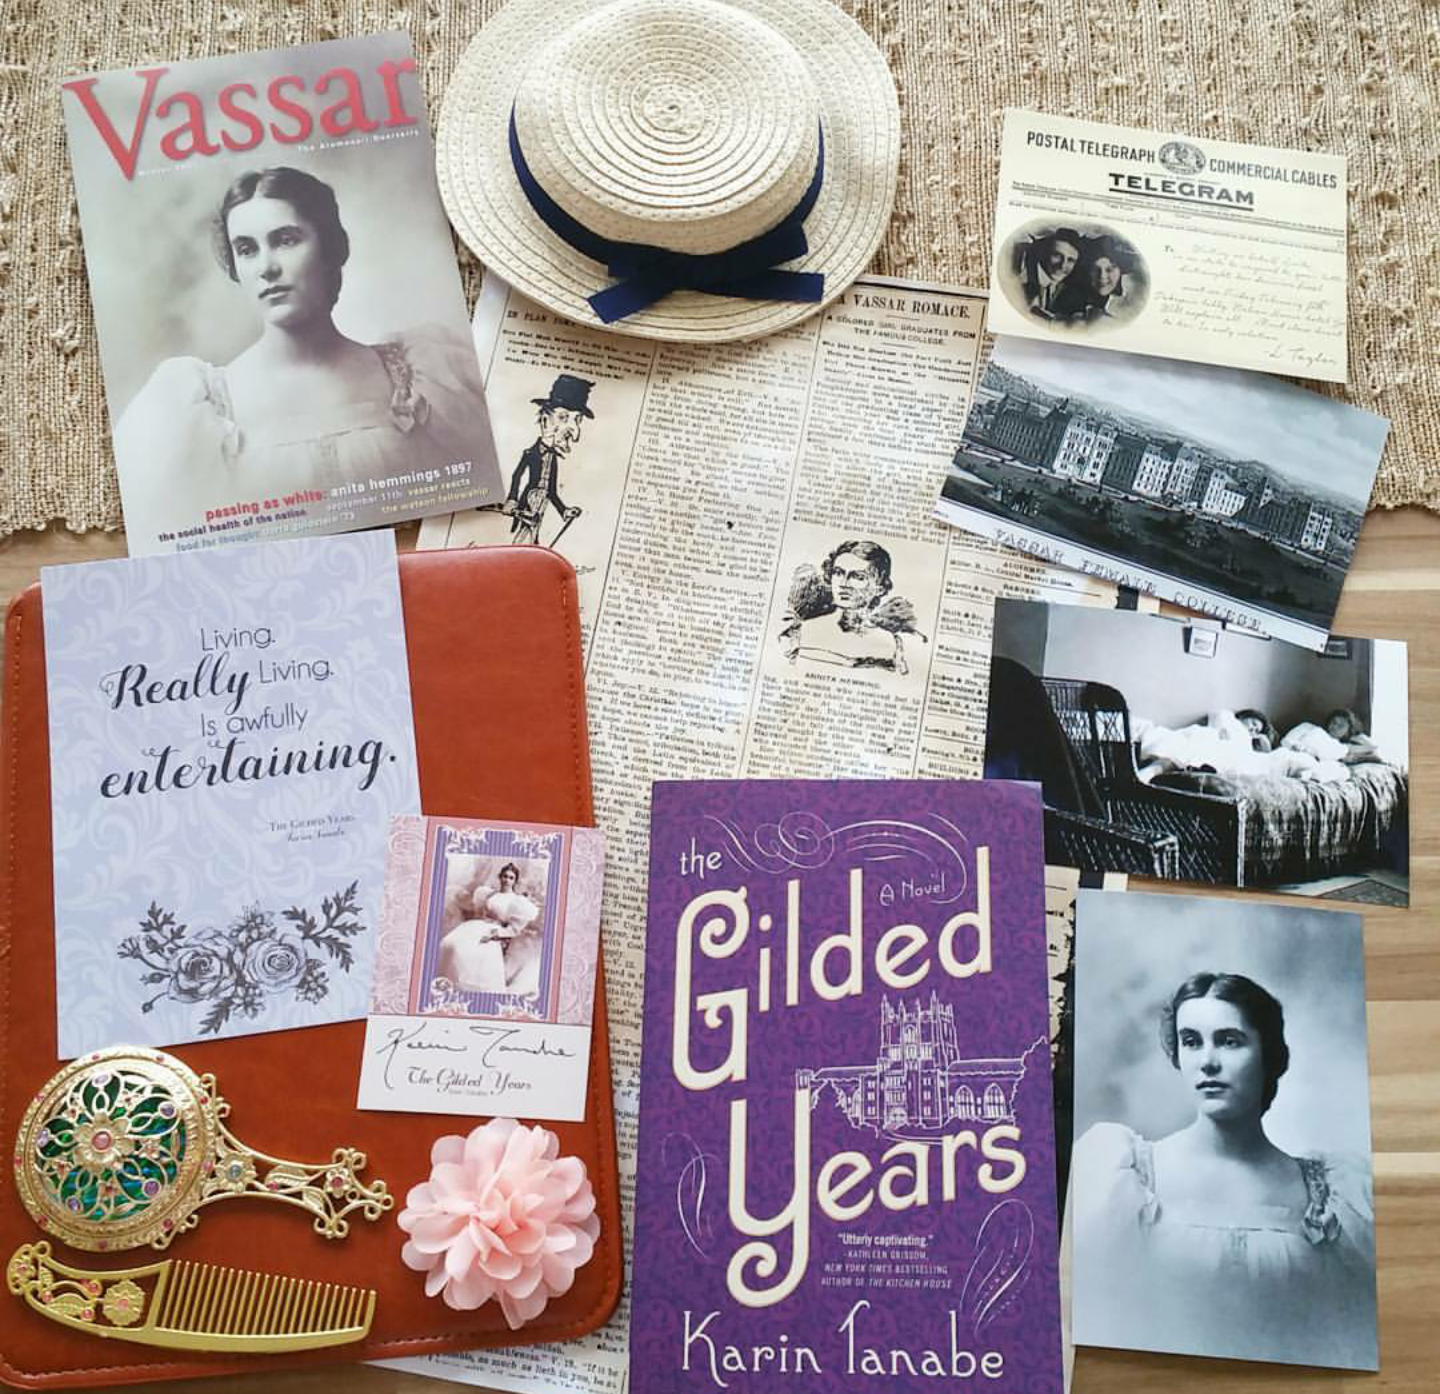 The Gilded Years book sits surrounded by a variety of items including black&white photos, a comb, newspaper clippings, and a hat